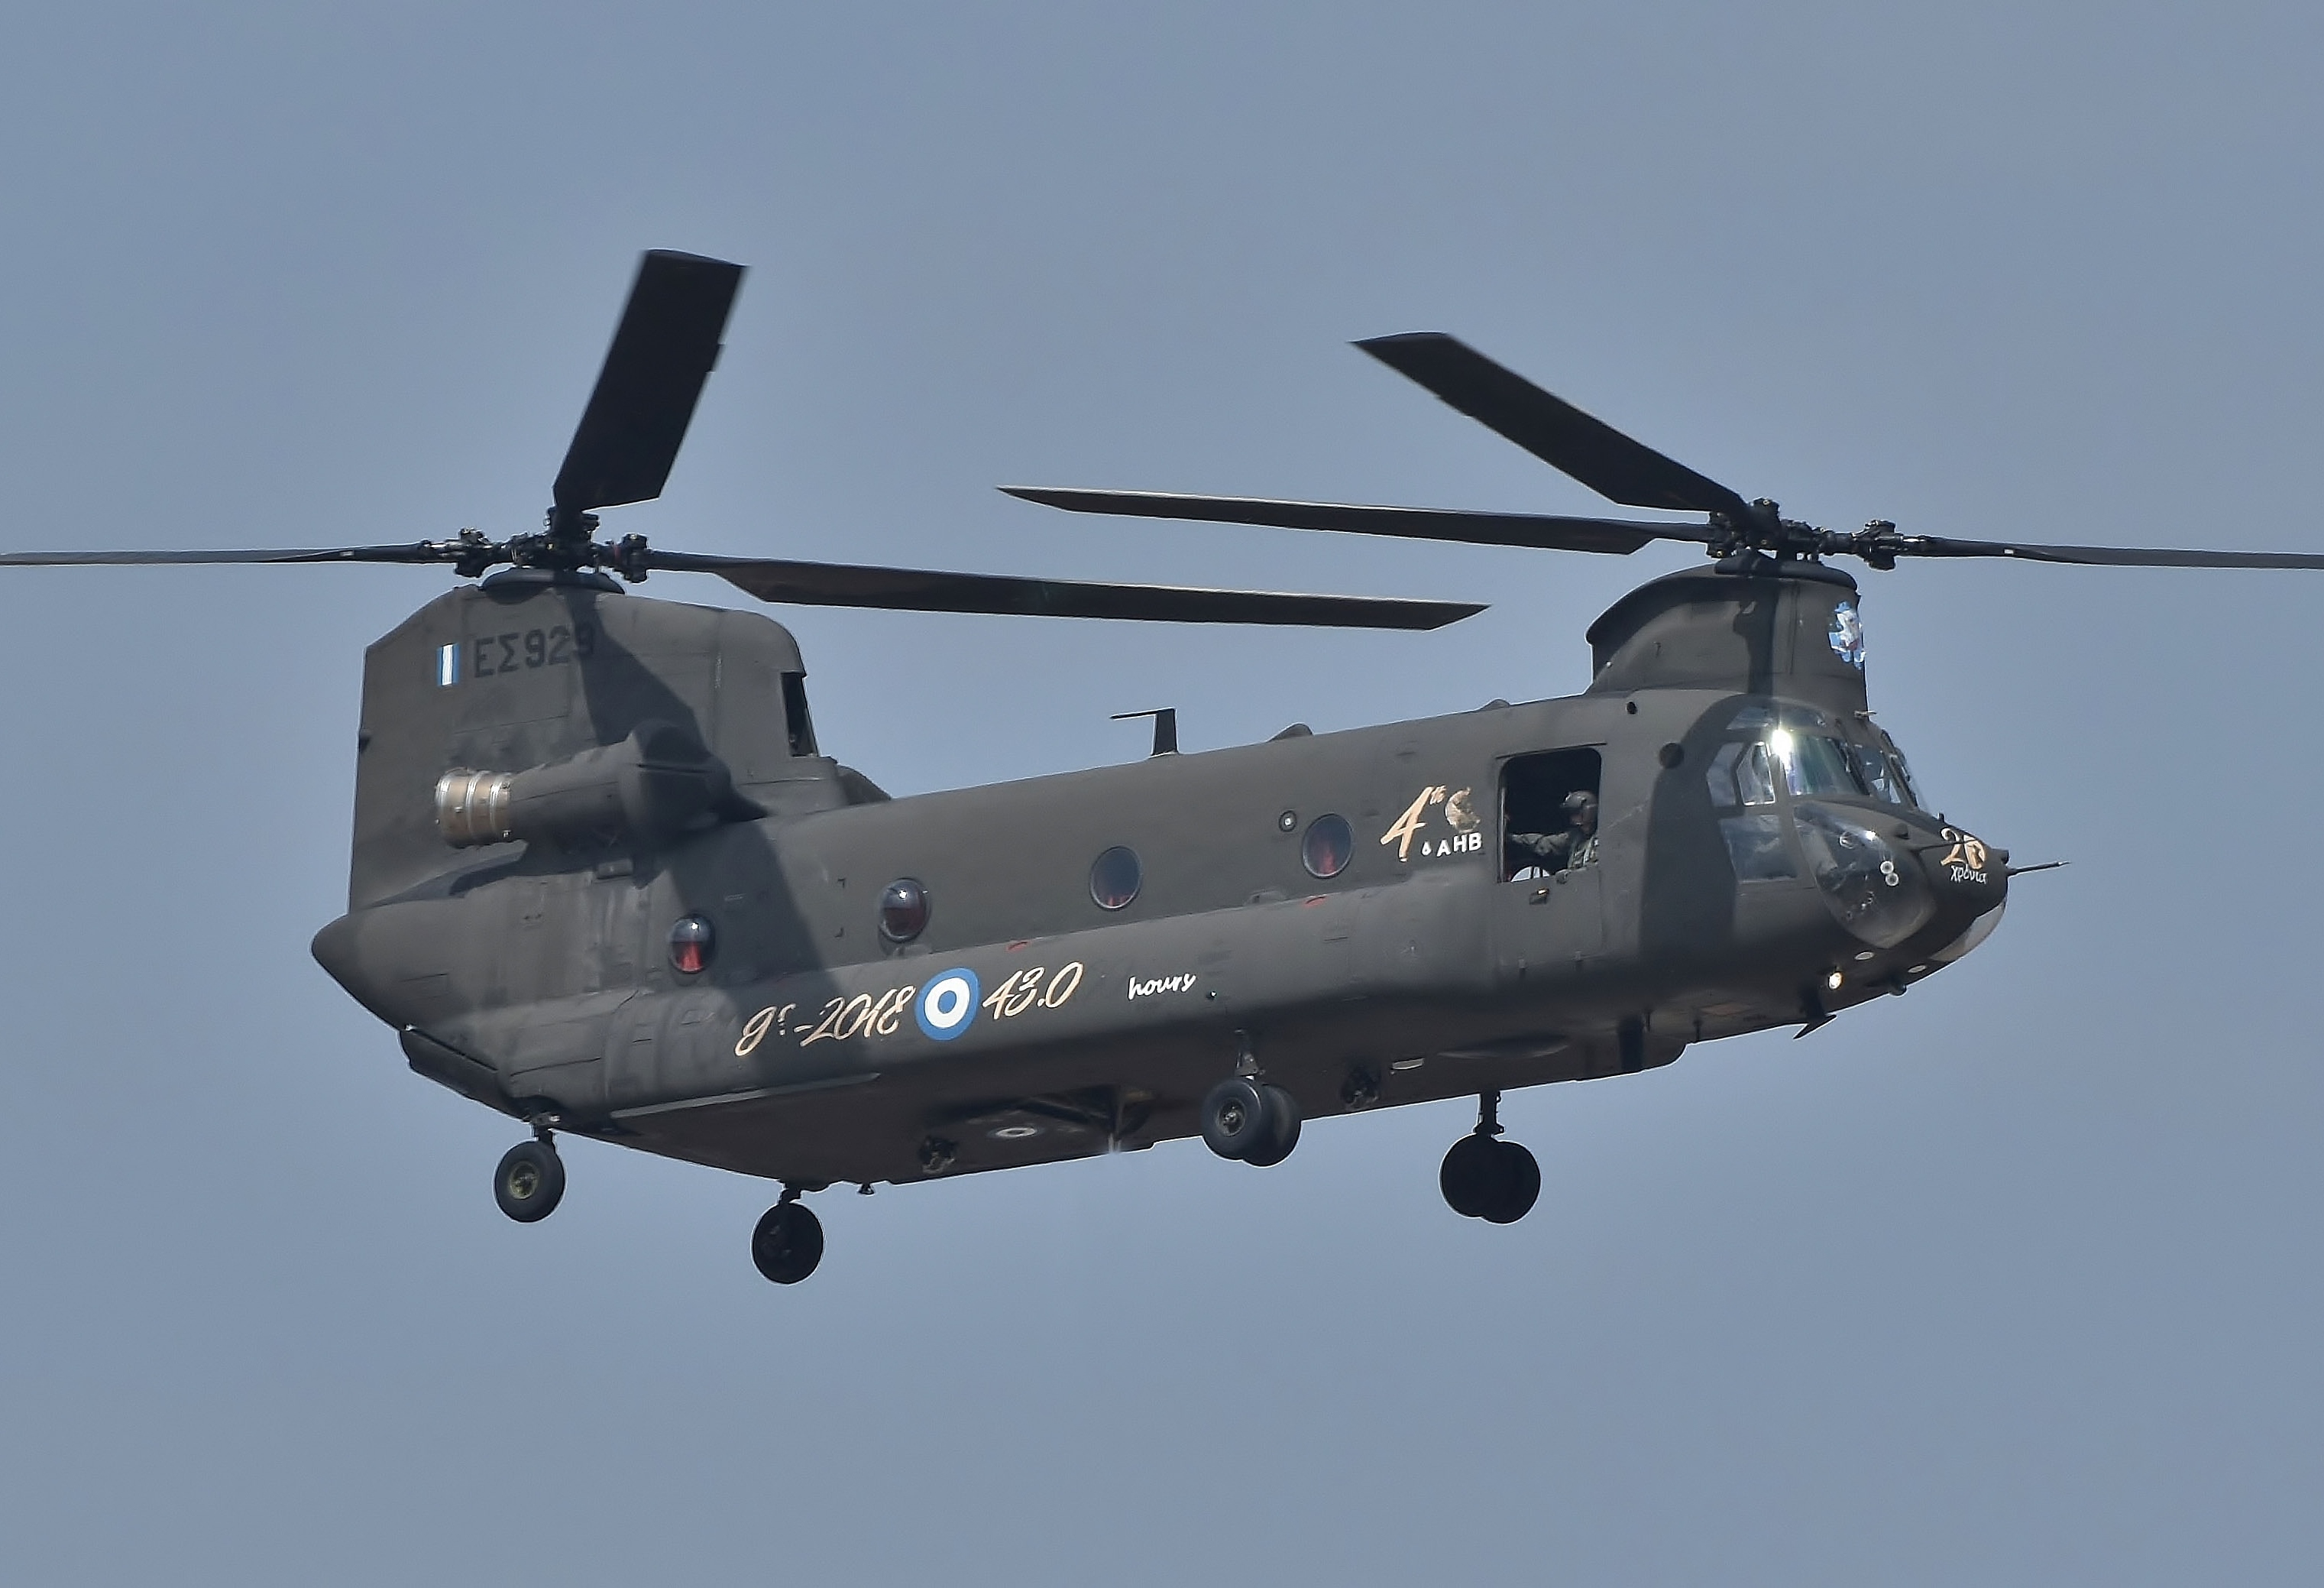 Boeing CH-47D Chinook - Hellenic army.